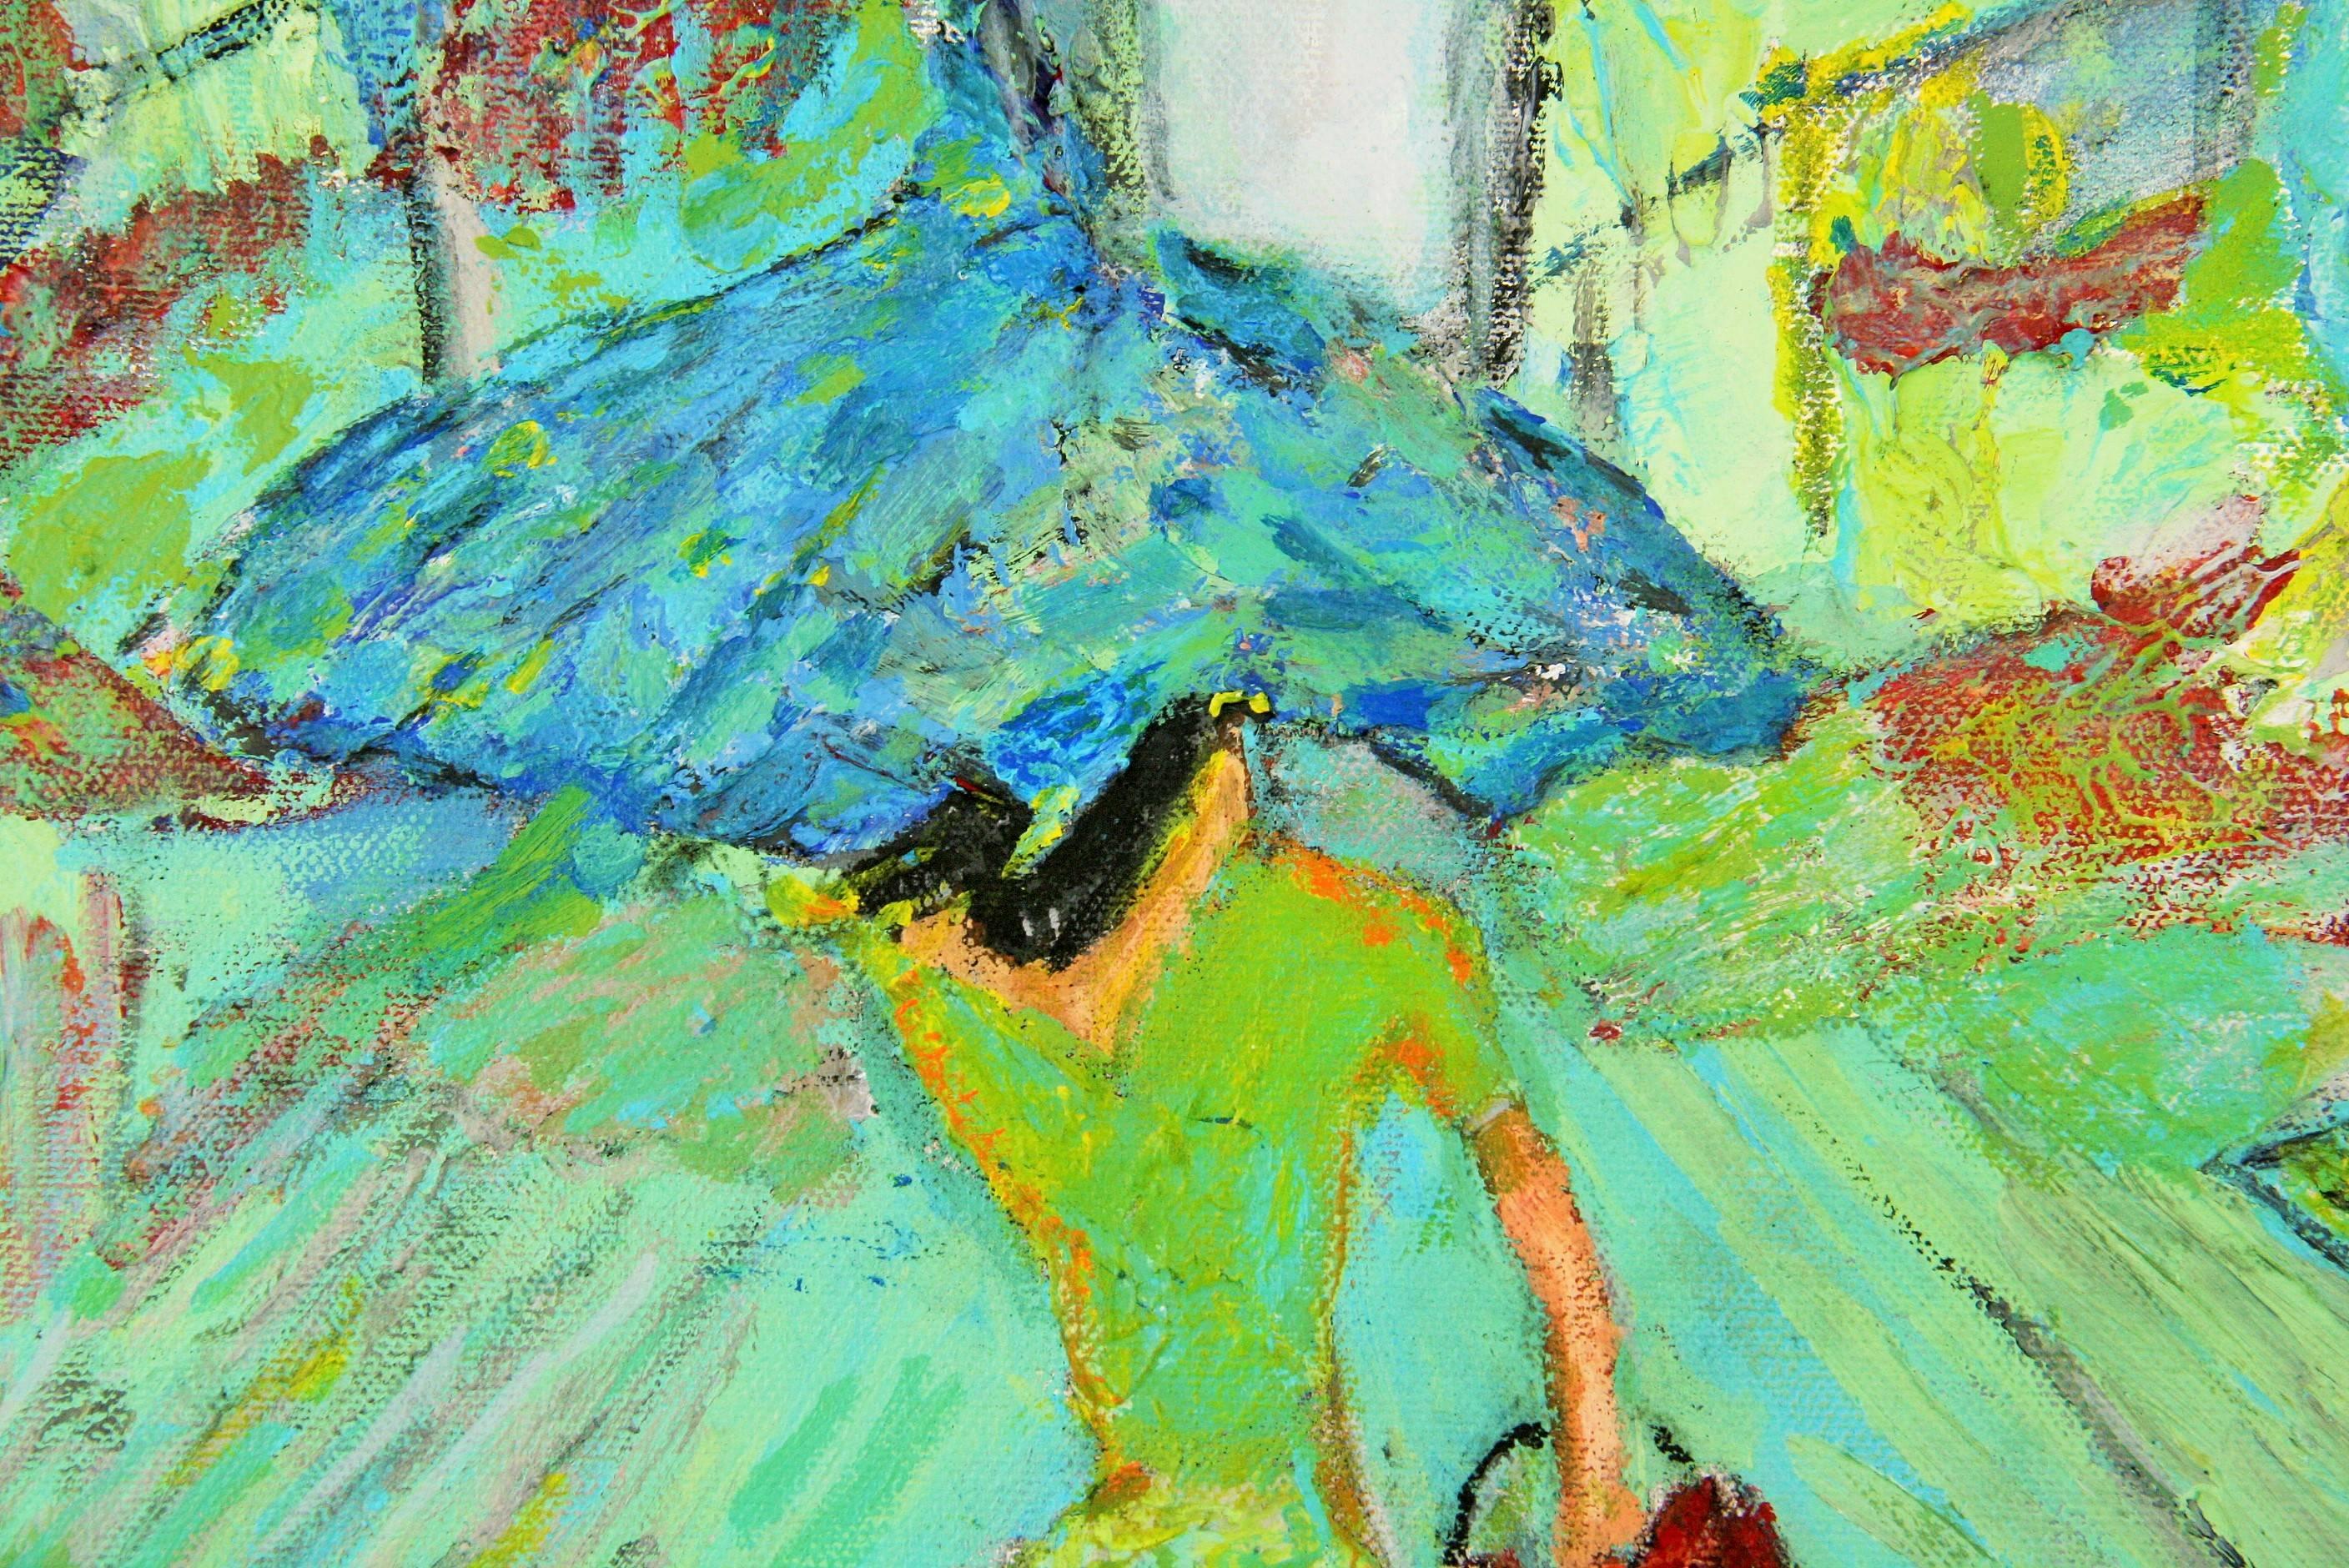 Rainy Day in Paris by Brunit - Green Abstract Painting by Unknown